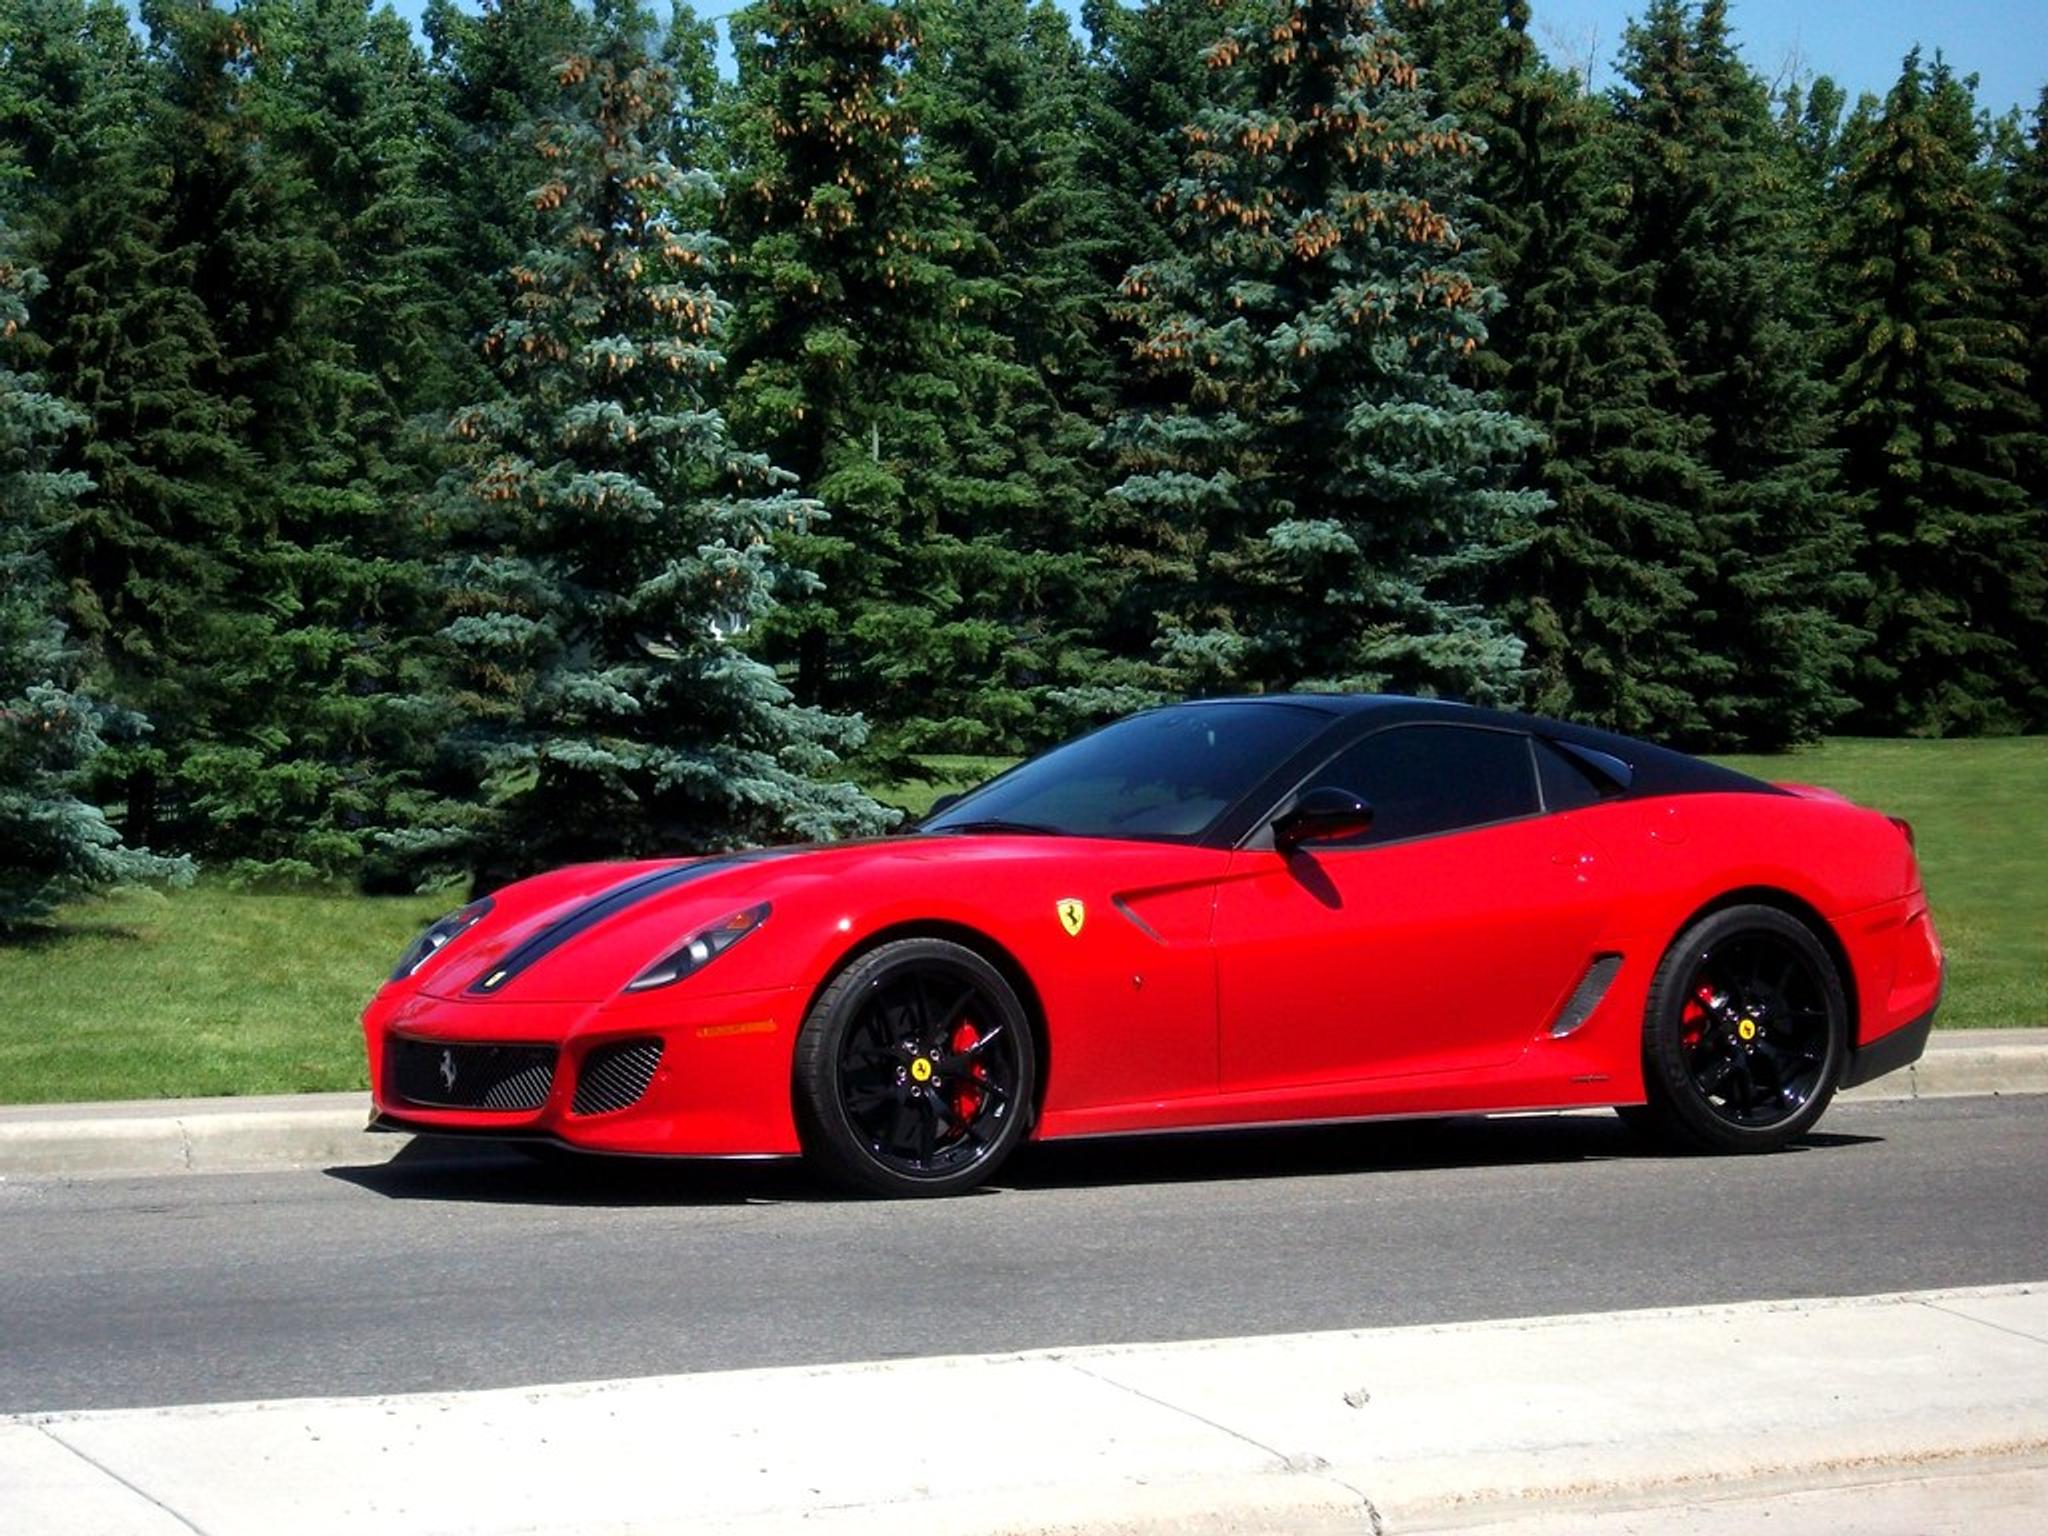 Red Ferrari 599 GTO with black stripe in the middle